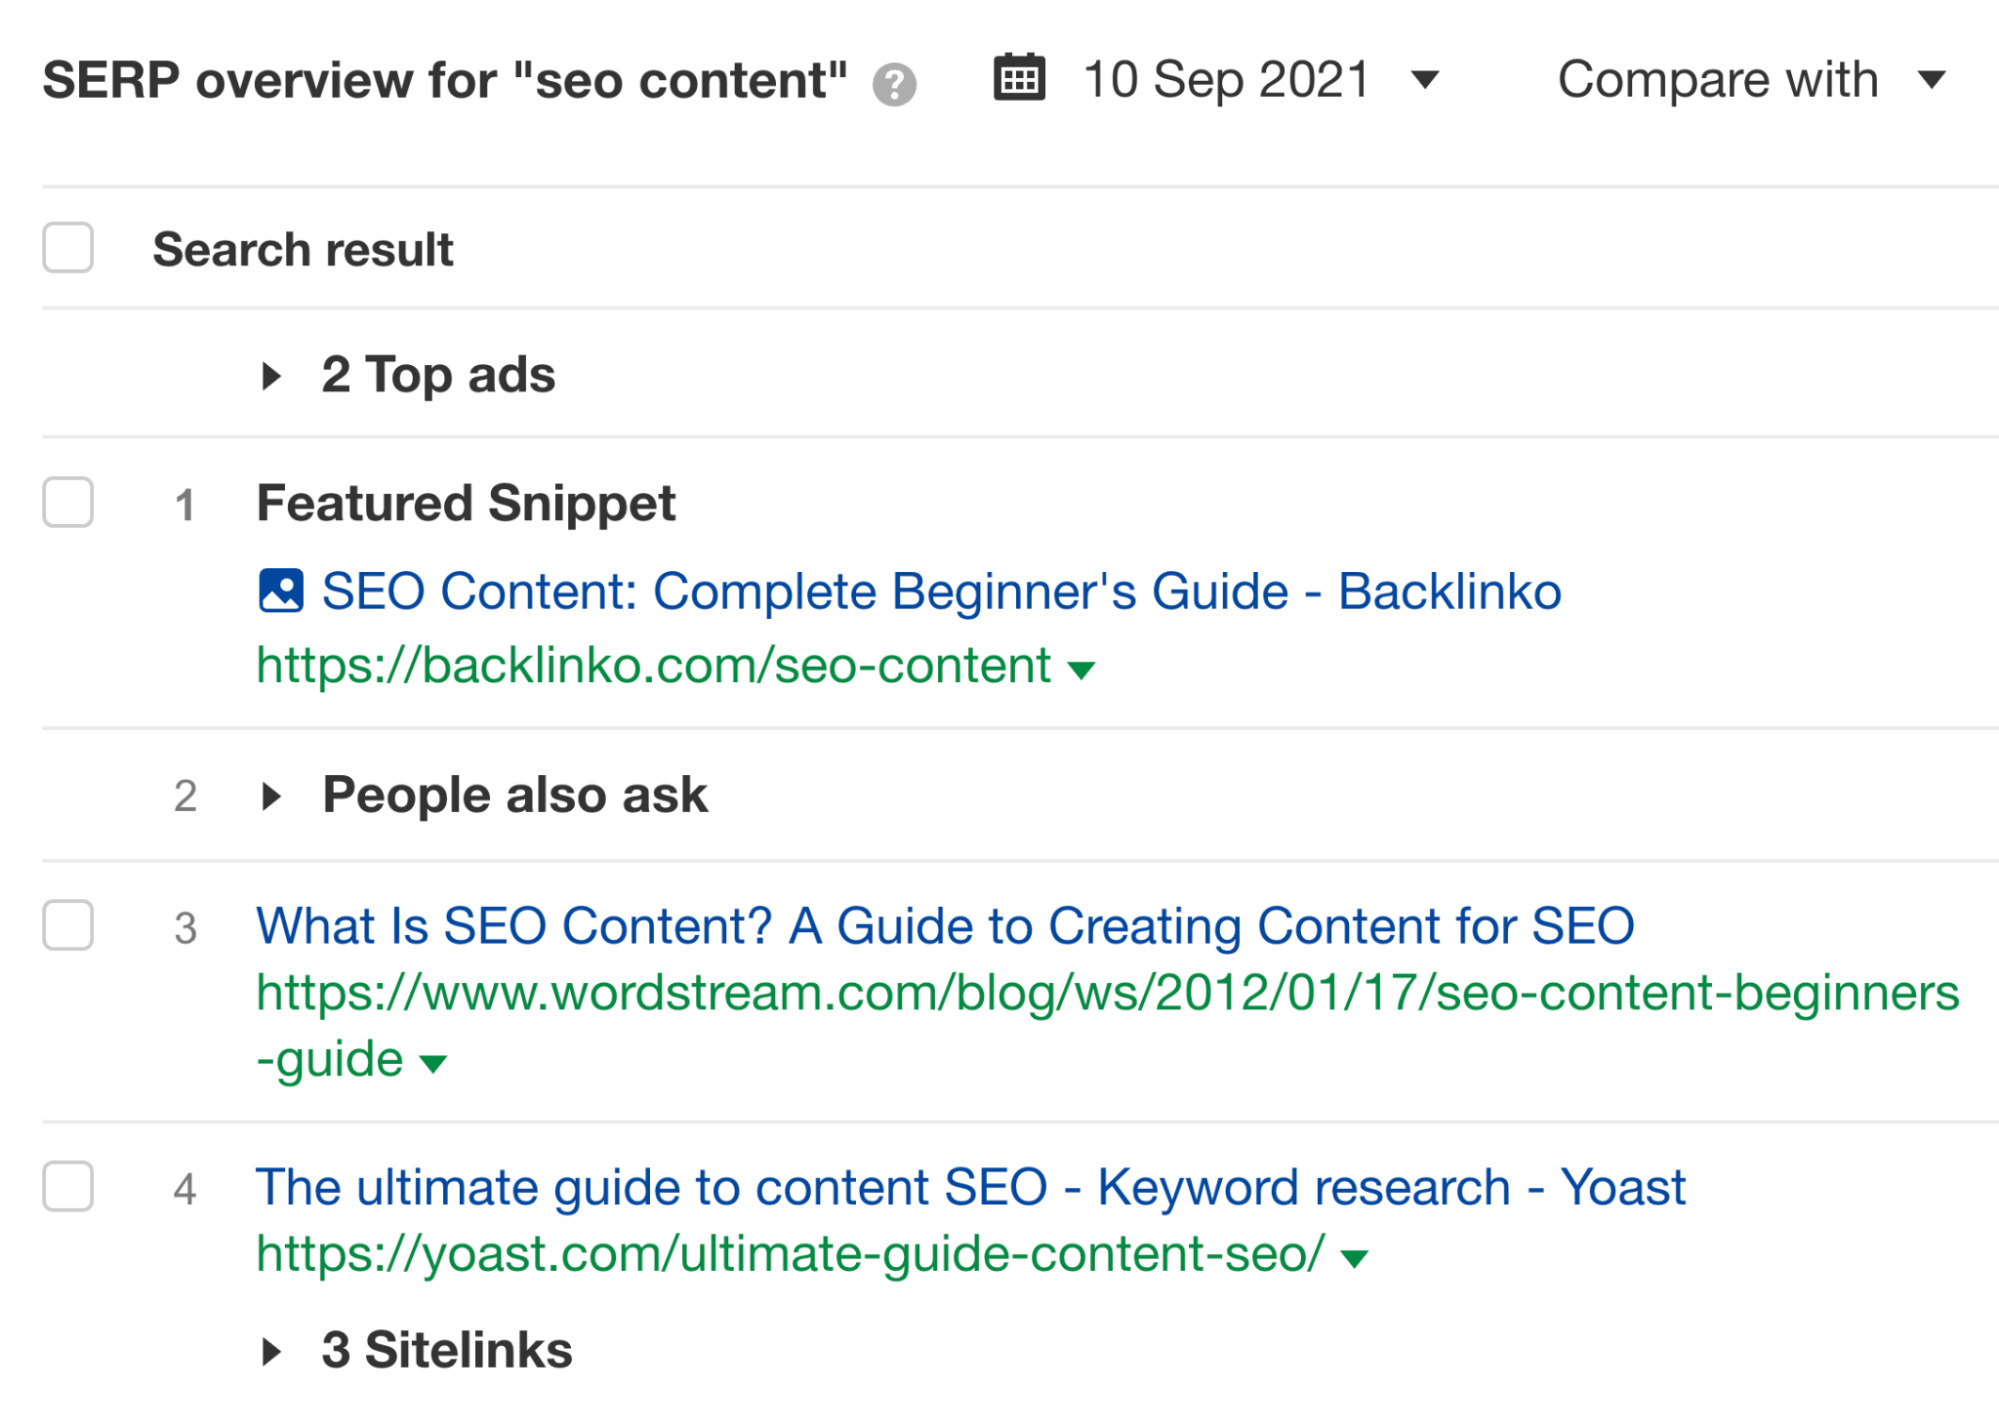 Historical SERP overview for the keyword "seo content"